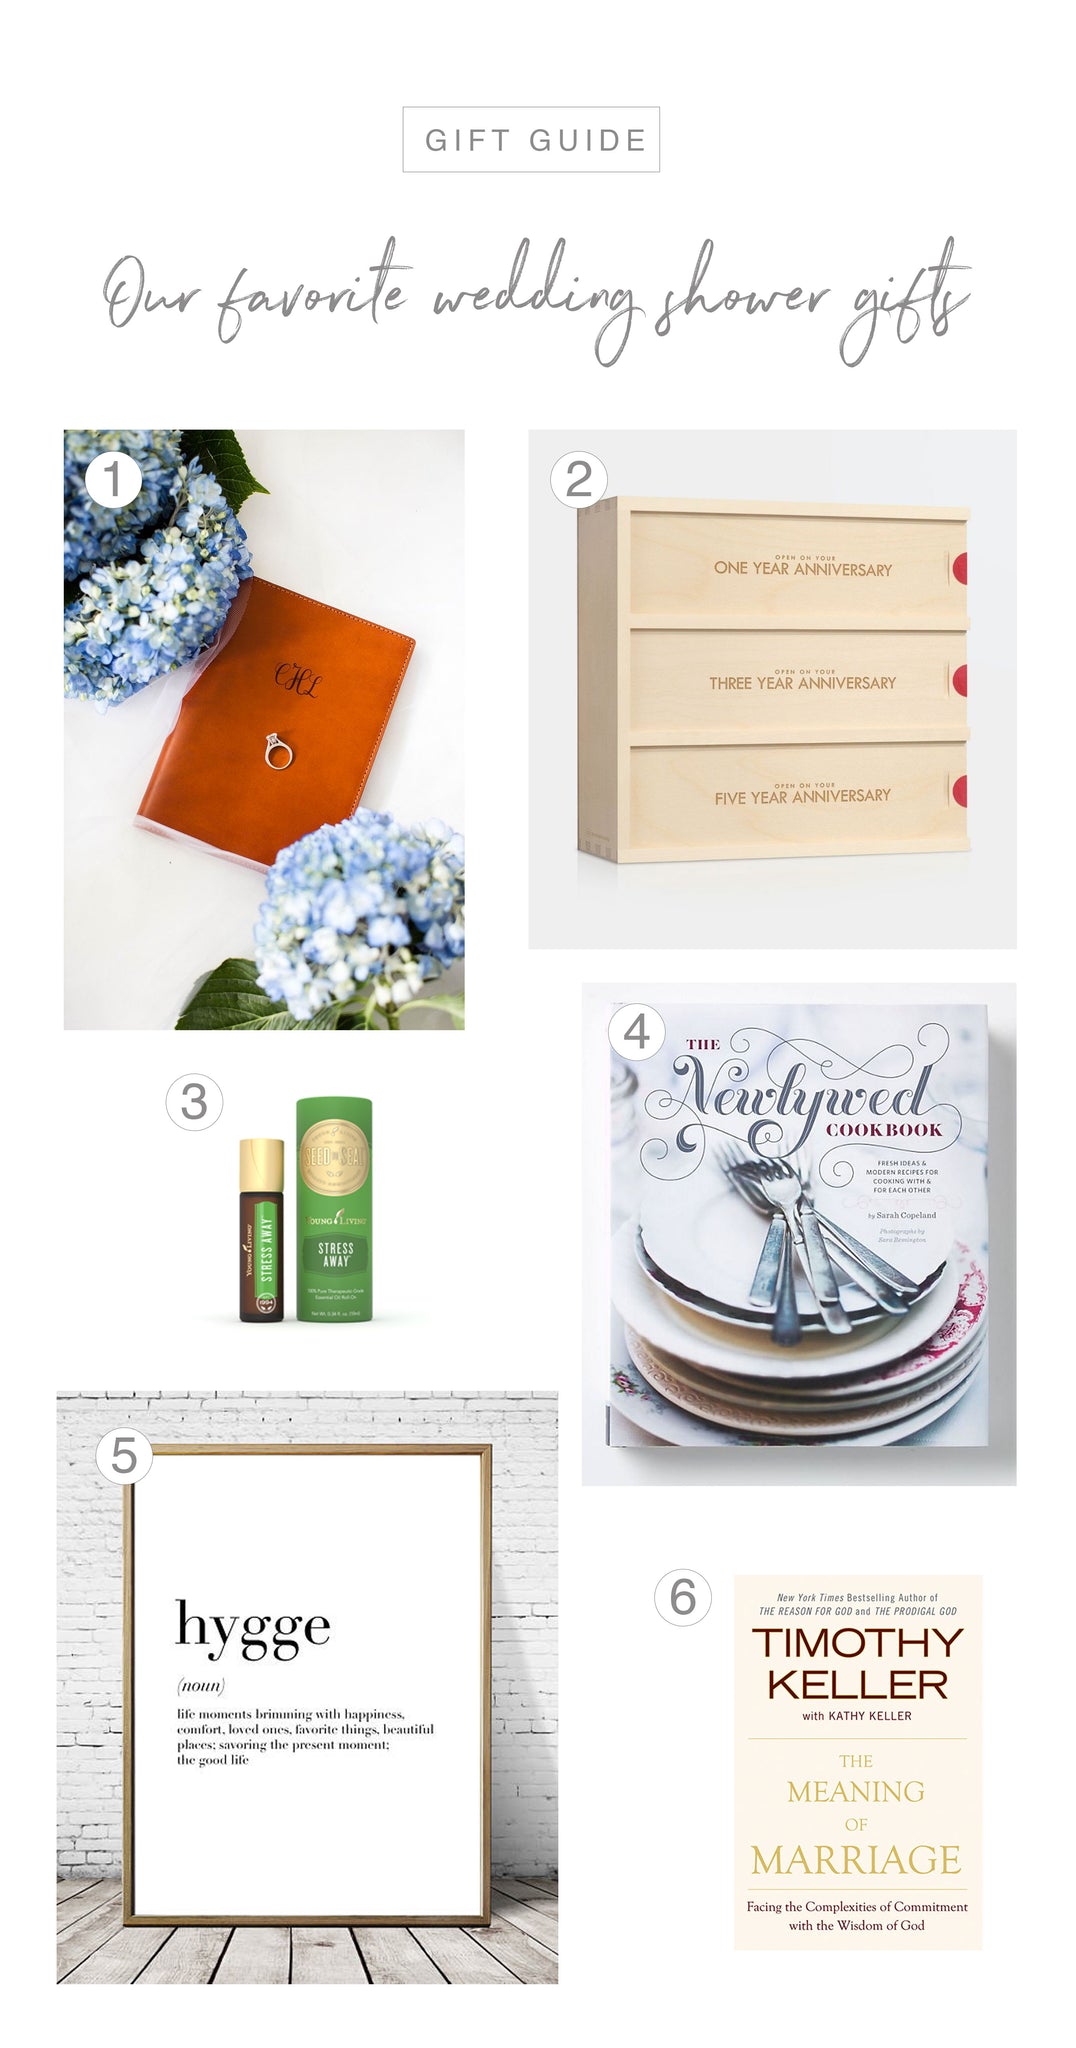 FOTO Blog | Our Favorite Wedding Shower Gifts Gift Guide!